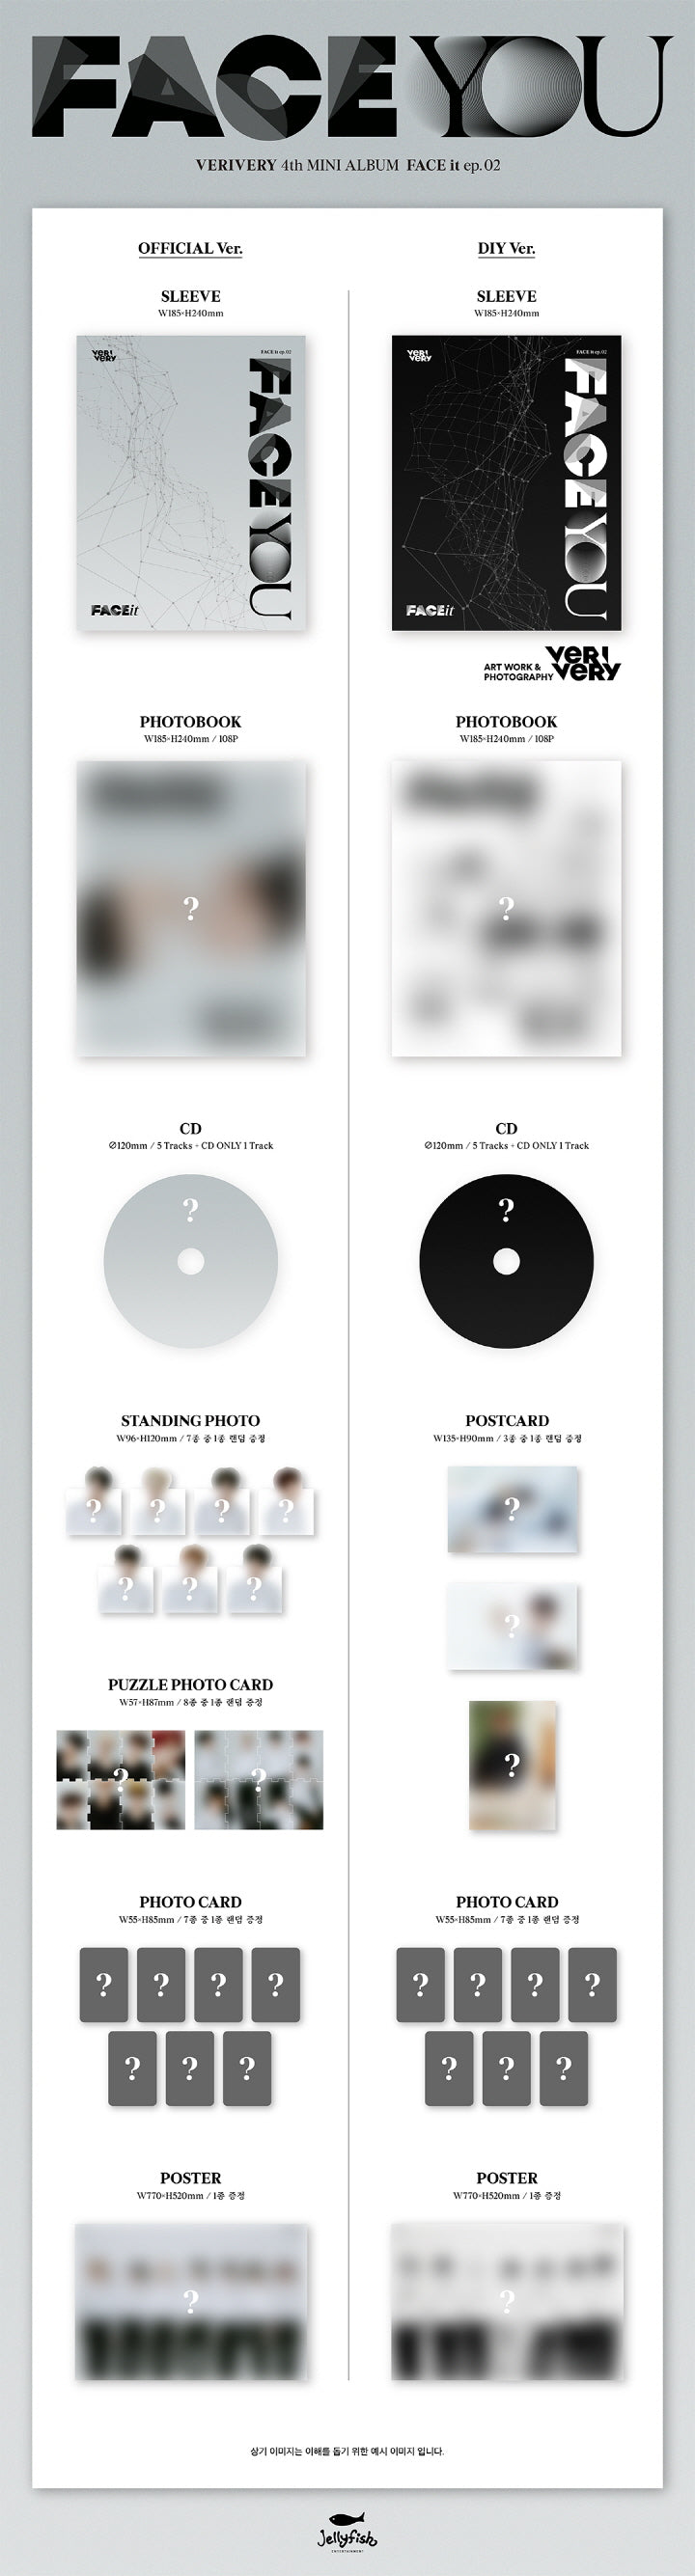 Official Version

1 CD
1 Photo Book (108 pages)
1 Standing Photo (random out of 7 types)
1 Puzzle Photo Card (random out o...